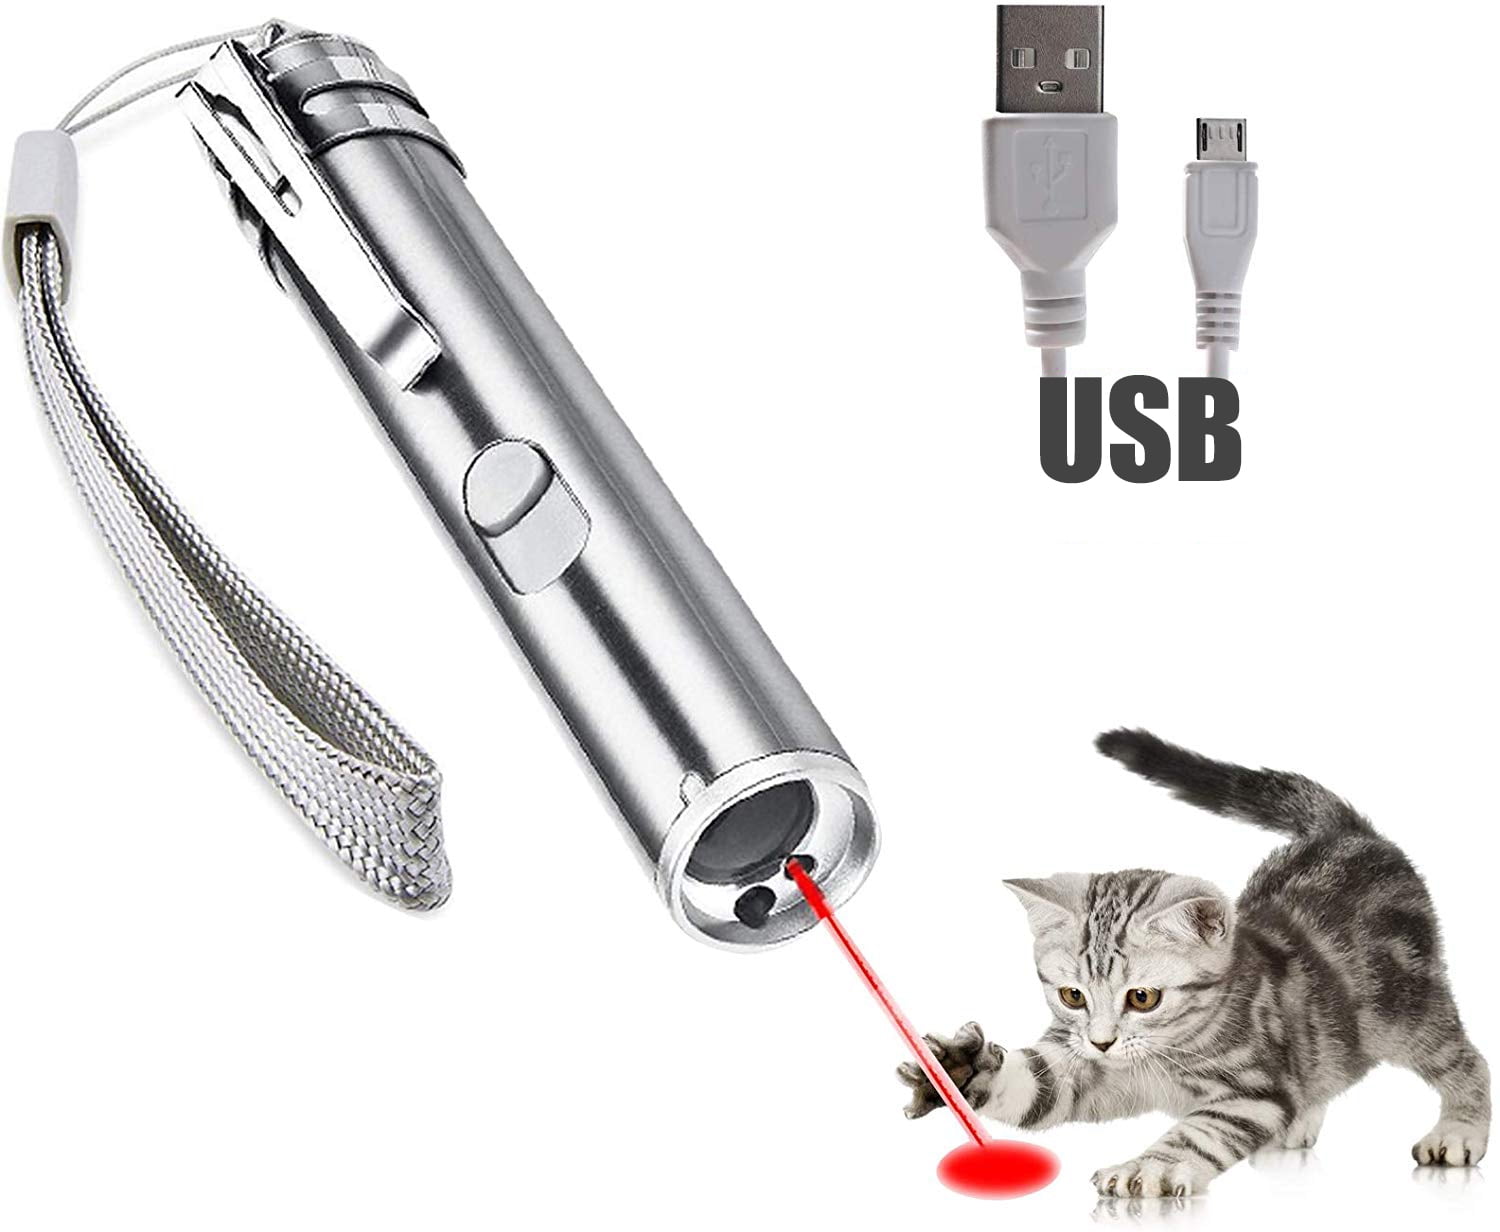 USB LASER POINTER RECHARGEABLE PEN ~ 3 in 1 Cat Pet Toy Red UV Flashlight ss 